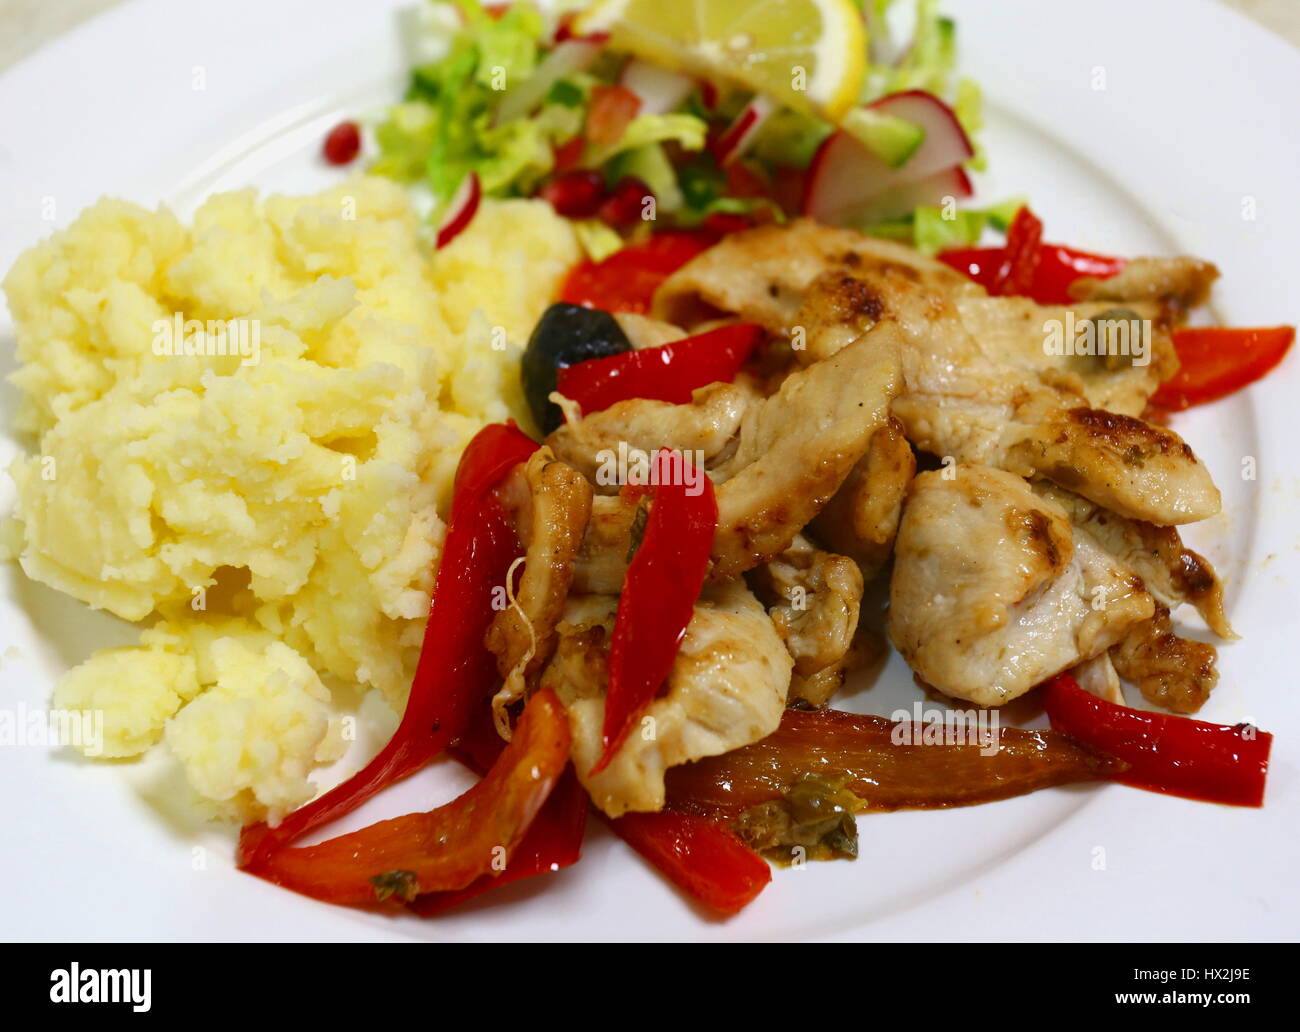 Stir fried chicken tenders and red capsicum slices cooked with olives and capers and served with mashed potato and a chopped salad Stock Photo